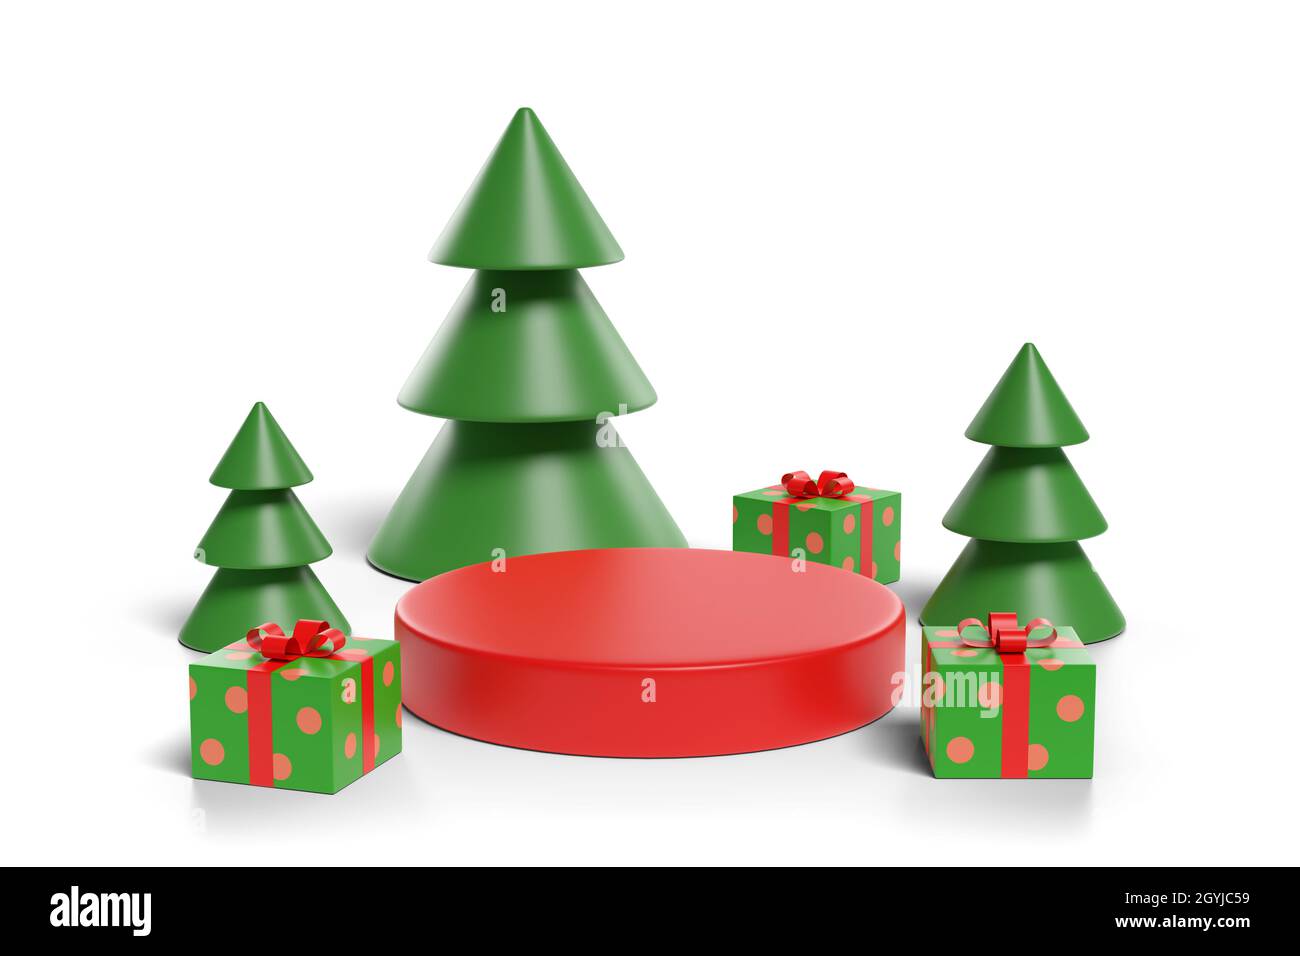 Christmas podium with trees and gifts isolated on white background. 3d illustration. Stock Photo